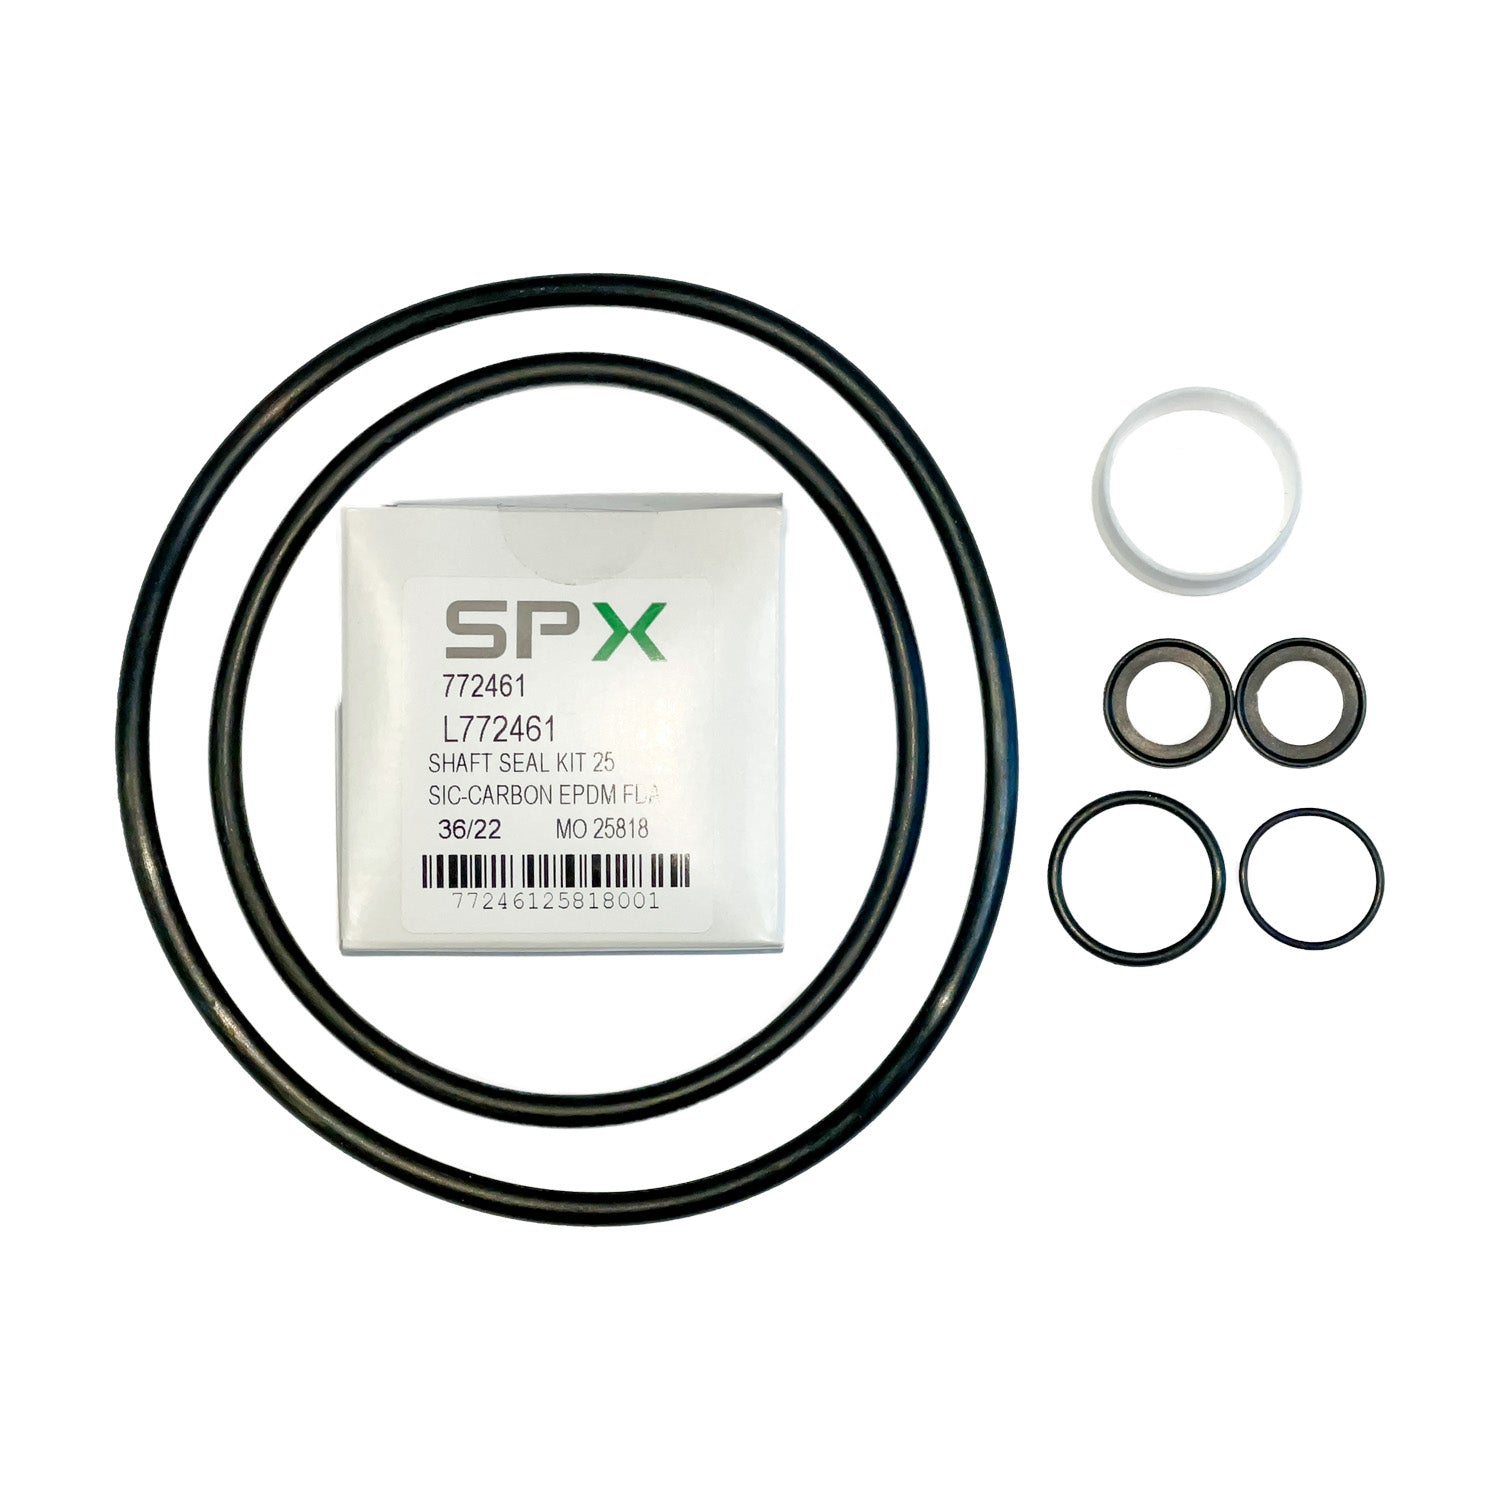 Seal Kit for Ws+20/15 EPDM - SiC/Carbon